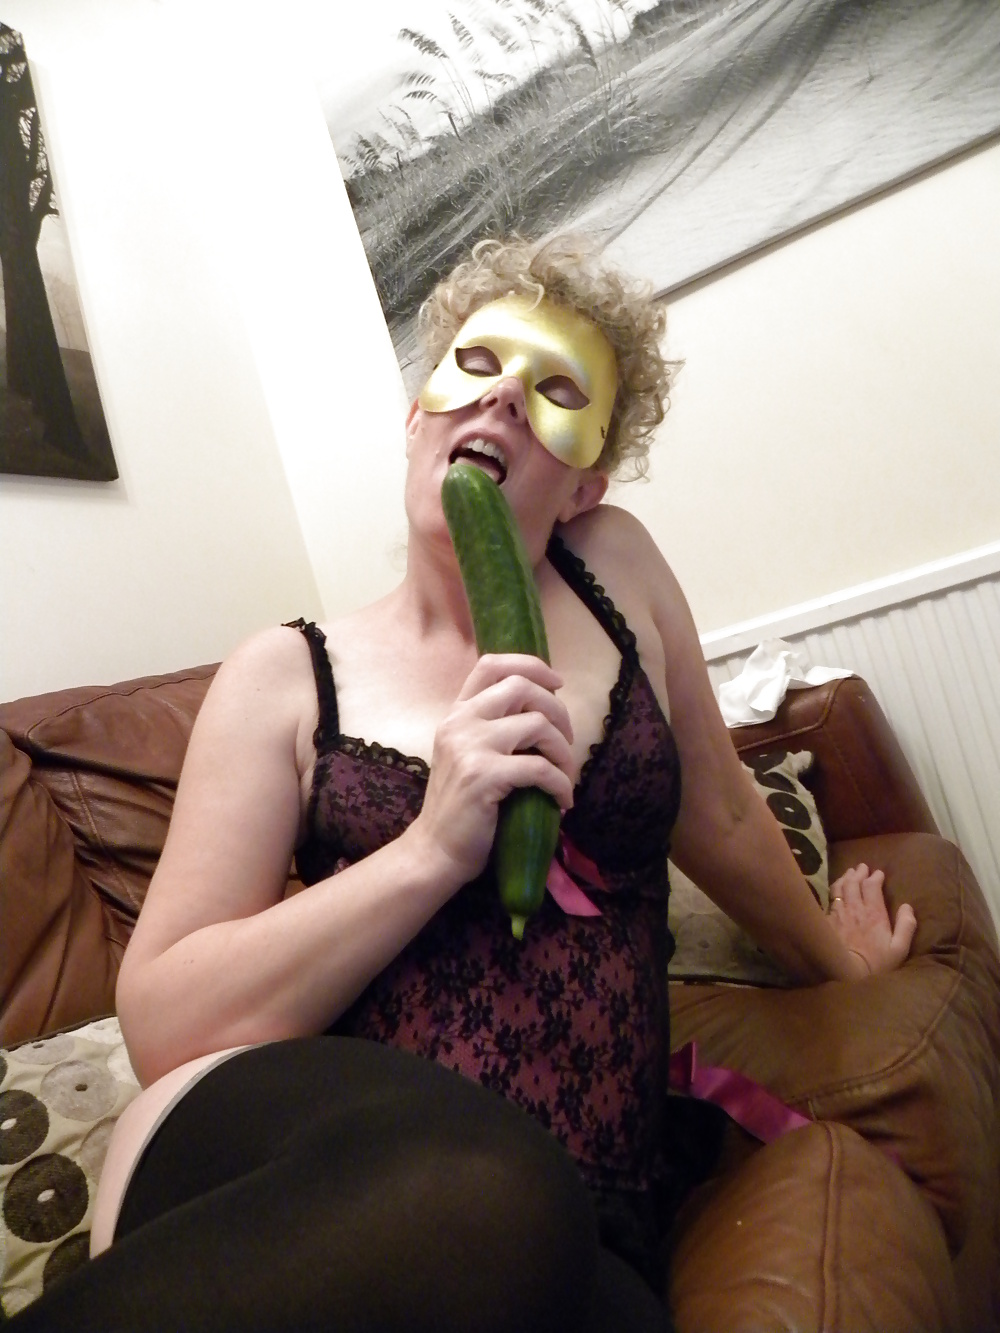 Sex Fun with a cucumber image